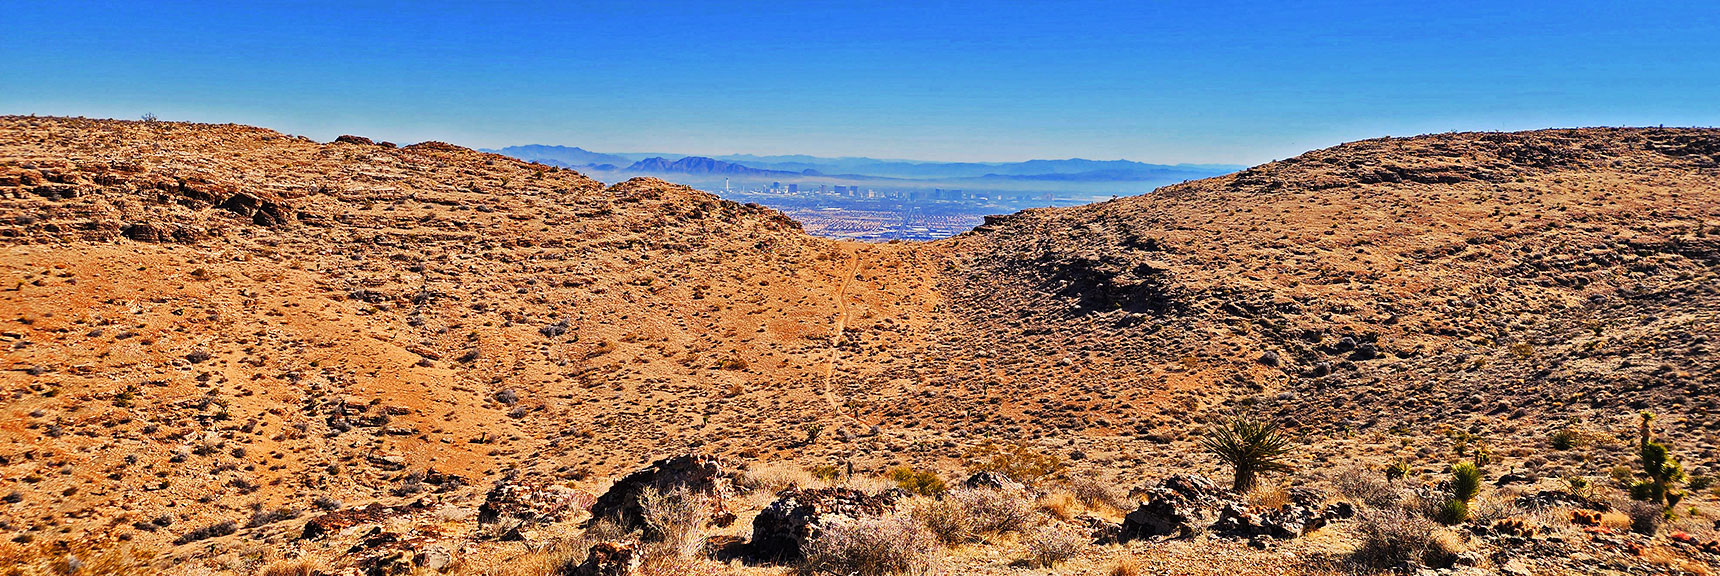 Cross-Over to High Eastern Overlook Ridge. Las Vegas Valley & Strip Background. | Eastern Outer Circuit | Blue Diamond Hill | Red Rock Canyon, Nevada